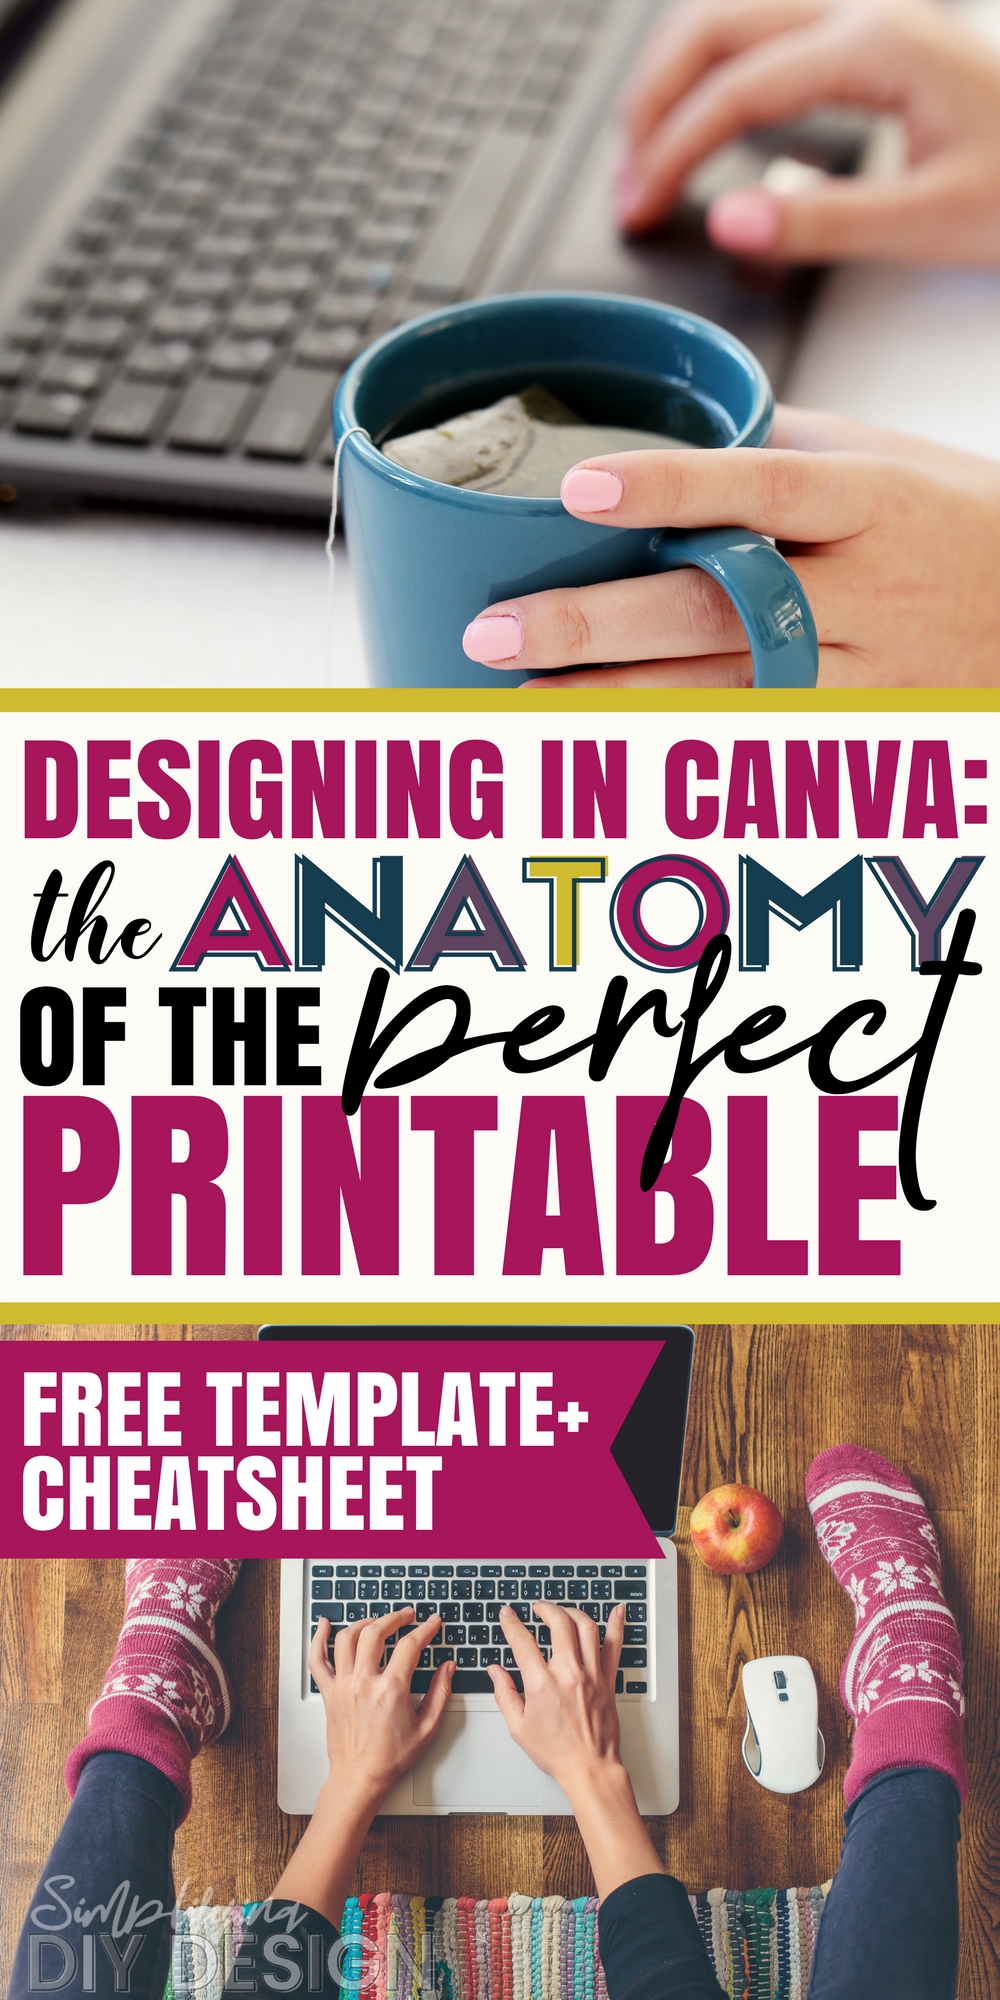 Taking the time to create a printable is SO important. If your printable doesn't stand out or if it's so unorganized and unprofessional looking then it will be hard to grow your blog. The perfectly designed printable has the power to grow your email list, help your readers take action, and help you generate income from blogging! Learn how to design a printable in canva!